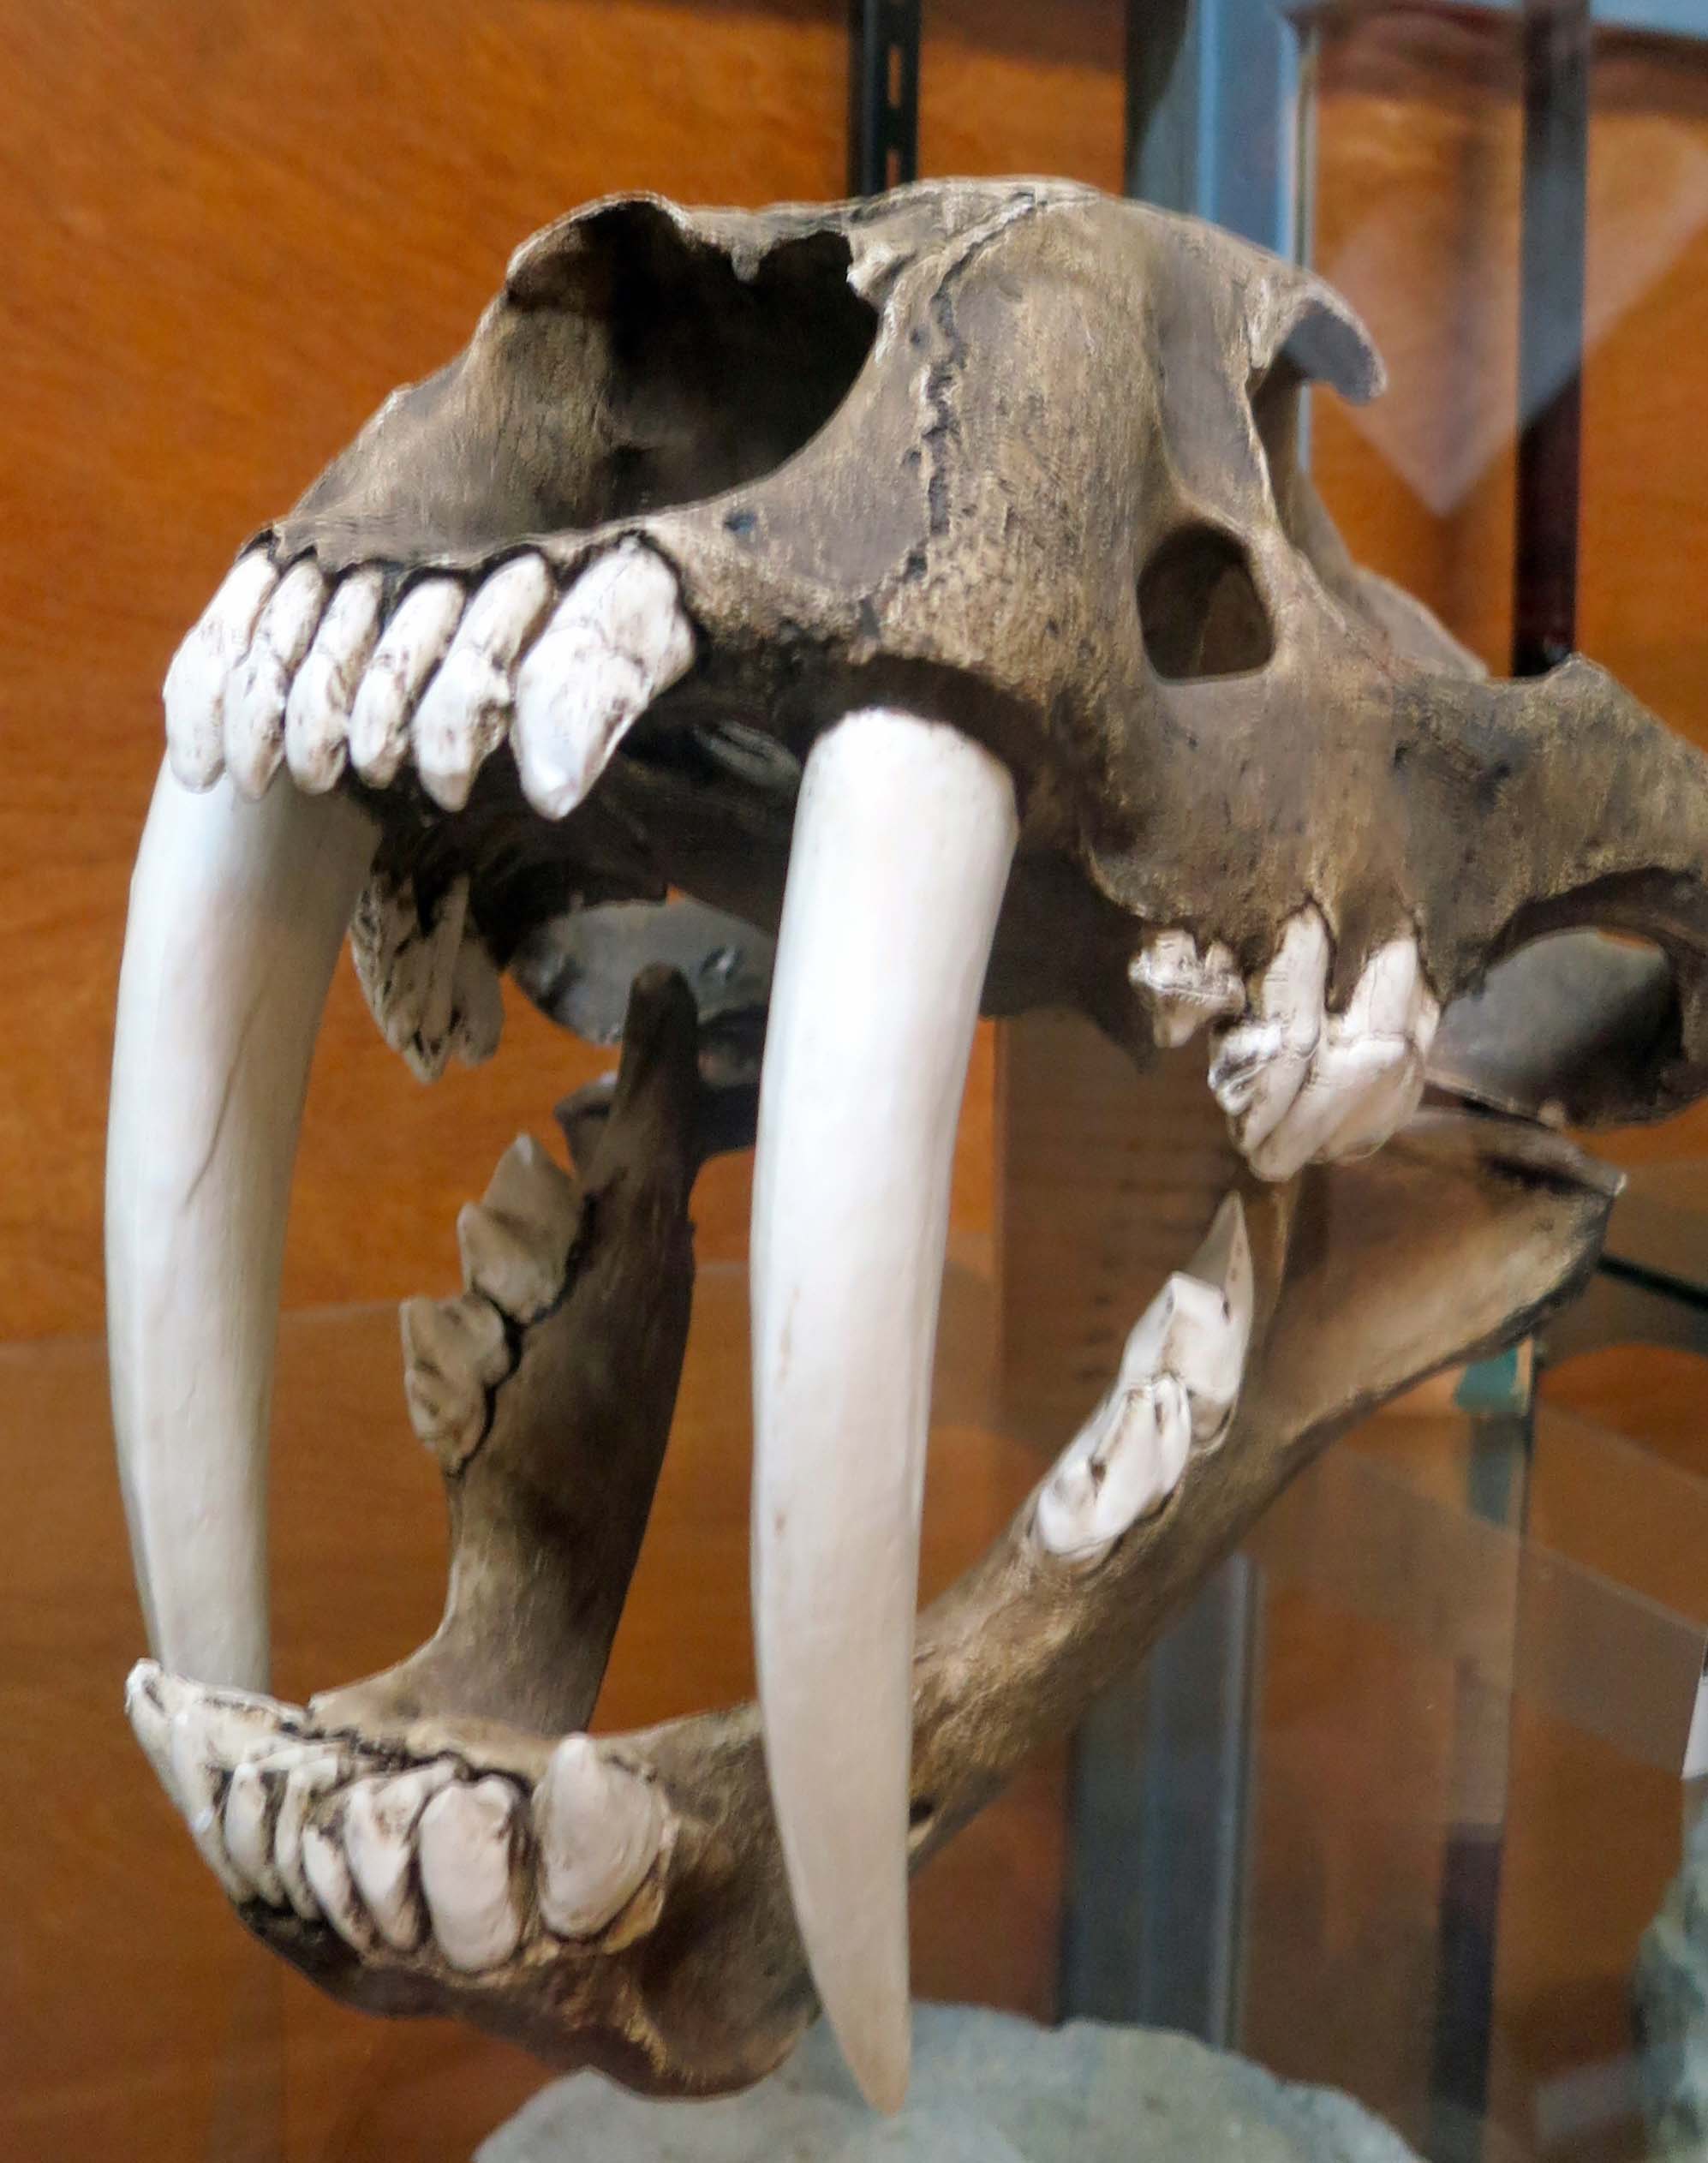 Speaking of bad, check out the canines on this Saber toothed kitty. 